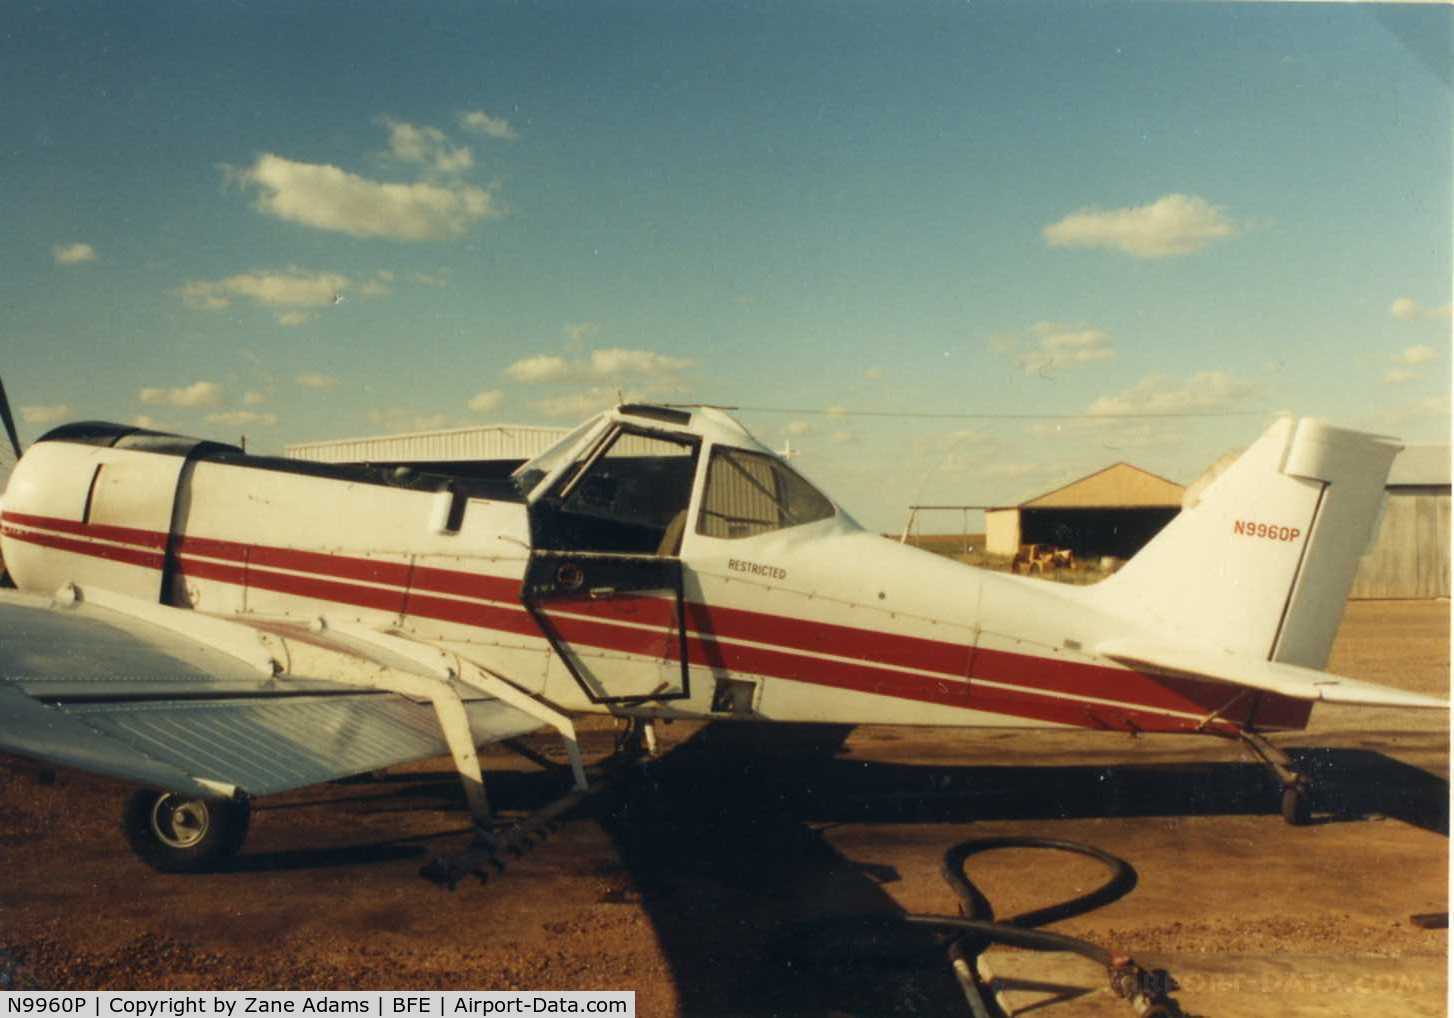 N9960P, 1975 Piper PA-36-285 Pawnee Brave C/N 36-7560071, Modified with 450hp Radial